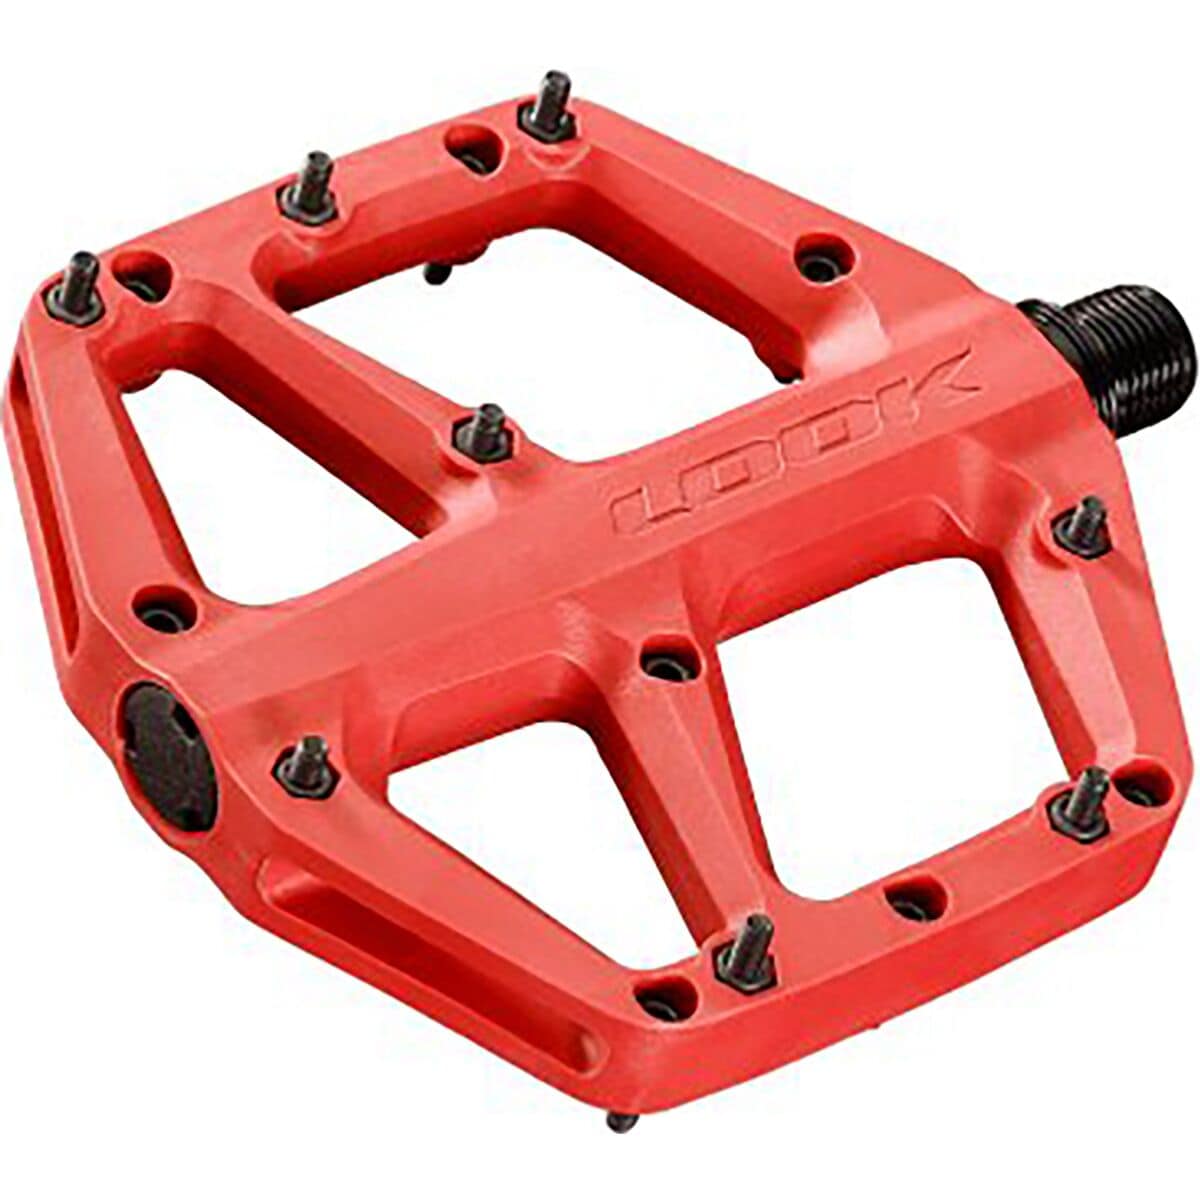 Look Cycle Trail Fusion Pedal